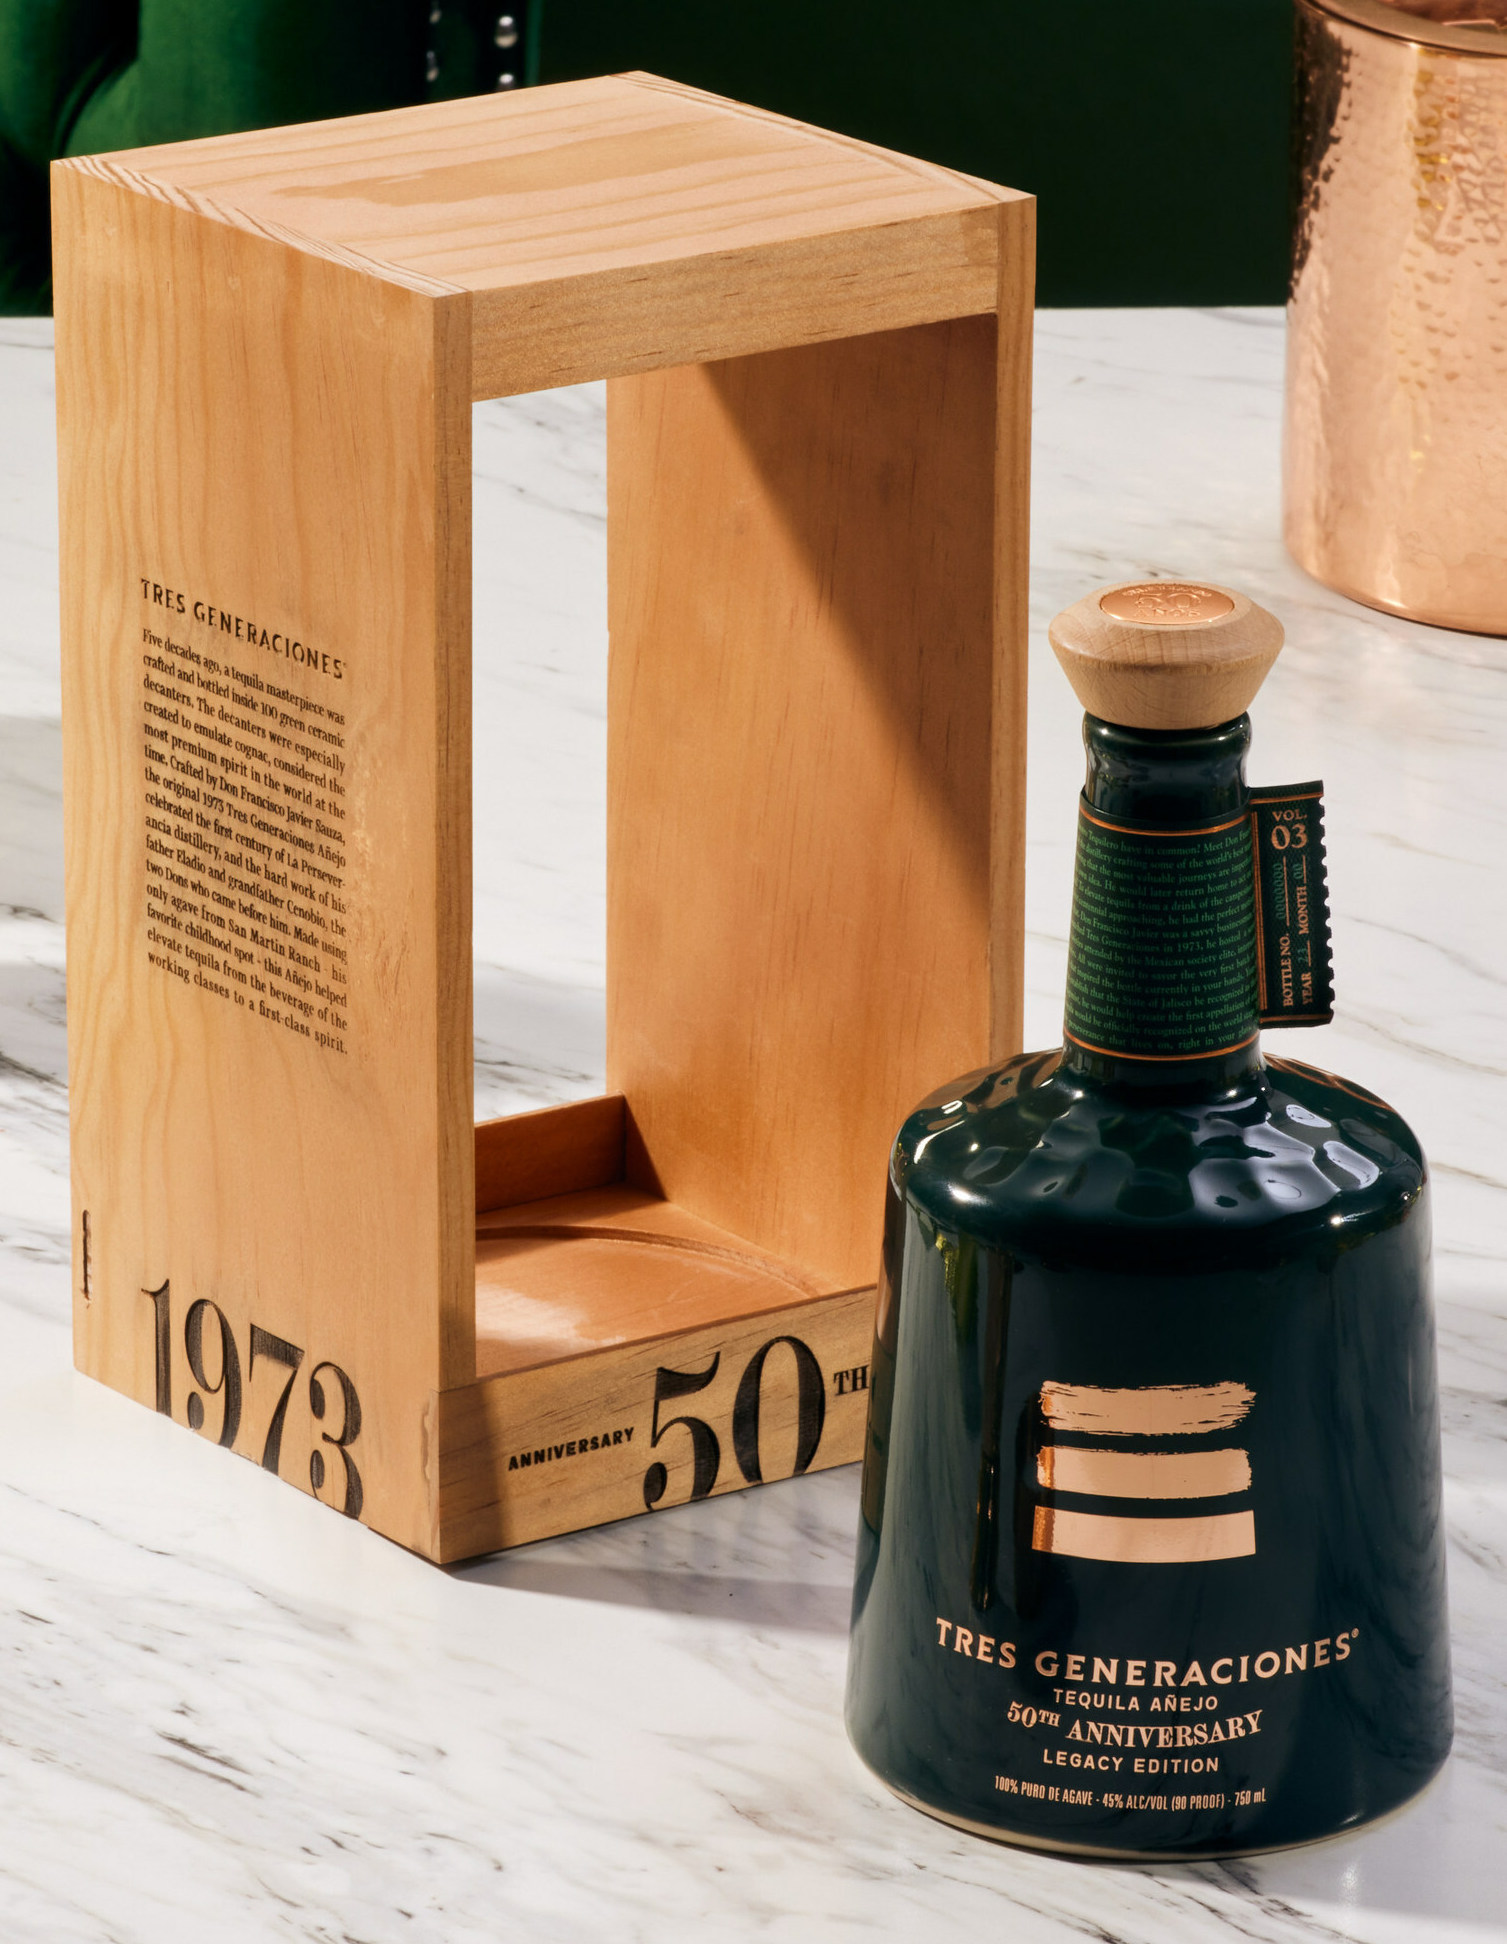 Tequila producer Tres Generaciones has released its 50th Anniversary Añejo, the third bottle in the brand's Legacy Edition Series of tequilas.